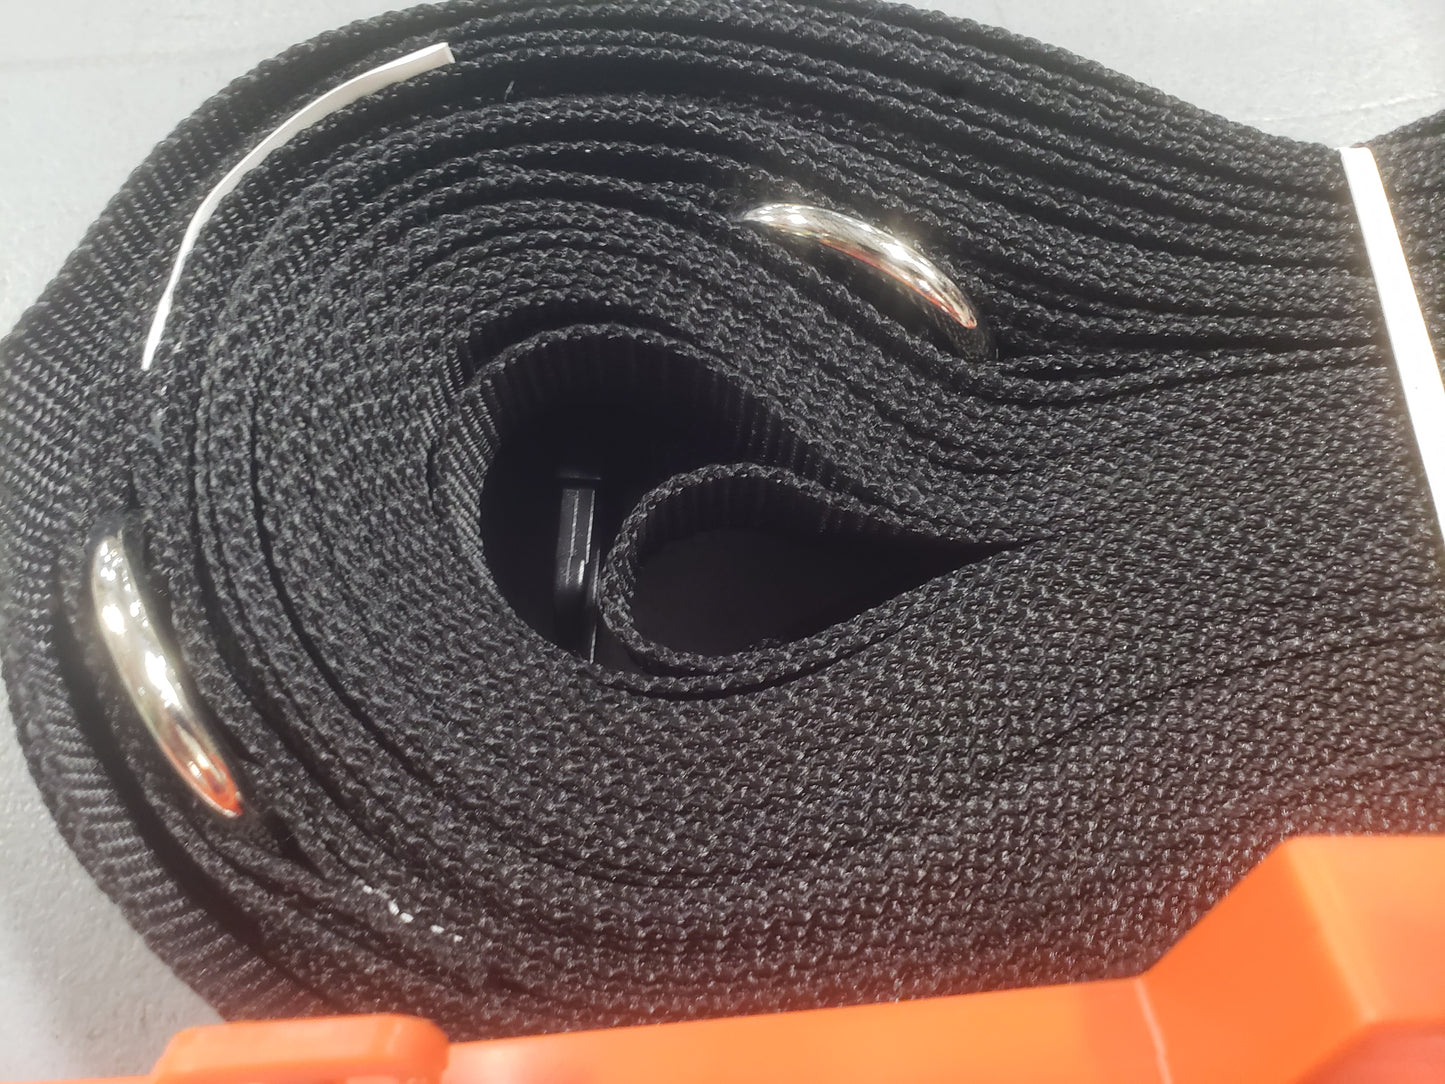 CLEARANCE ITEM #61: M817NAS, Black: Volleyball Boundary Non-Adjustable 1-inch Webbing, Sand Pegs, Black, 26.3' x 52.6' size